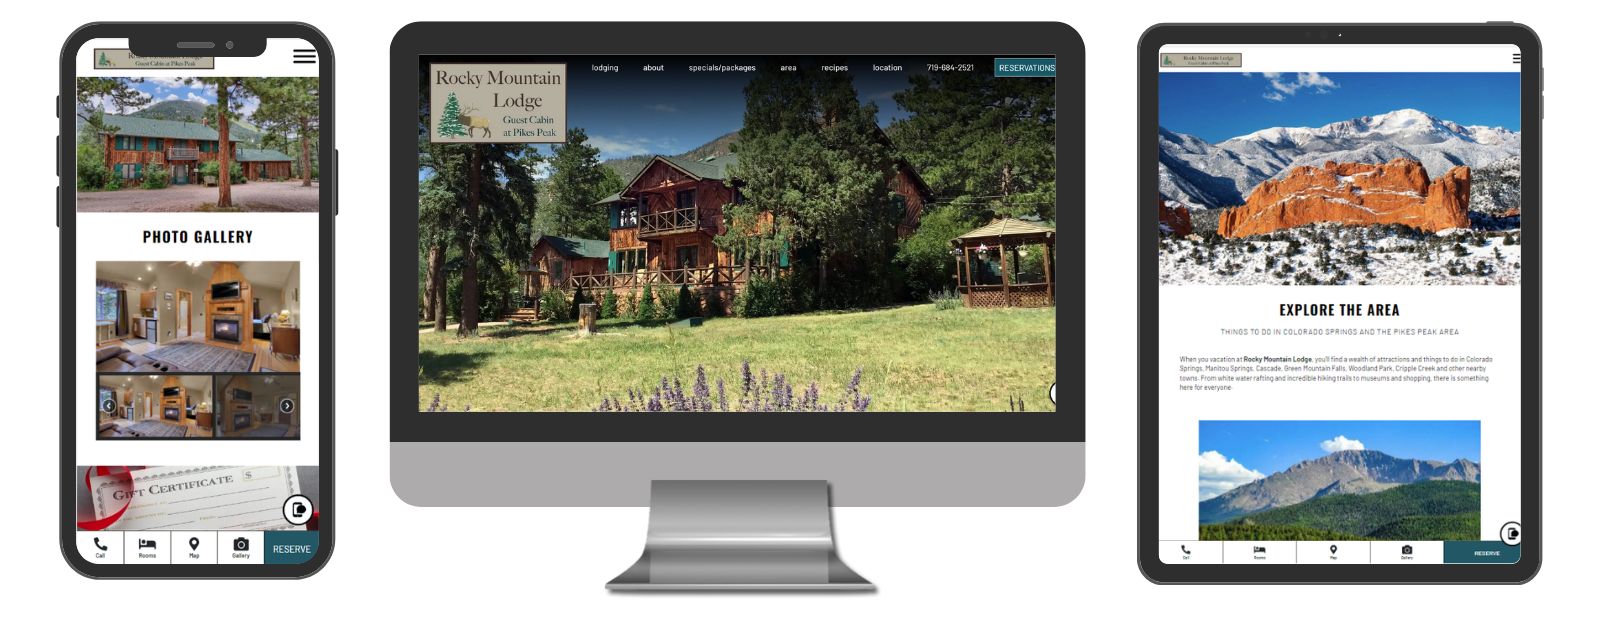 Rocky Mountain Lodge website displayed in 3 sizes - mobile, template and desktop